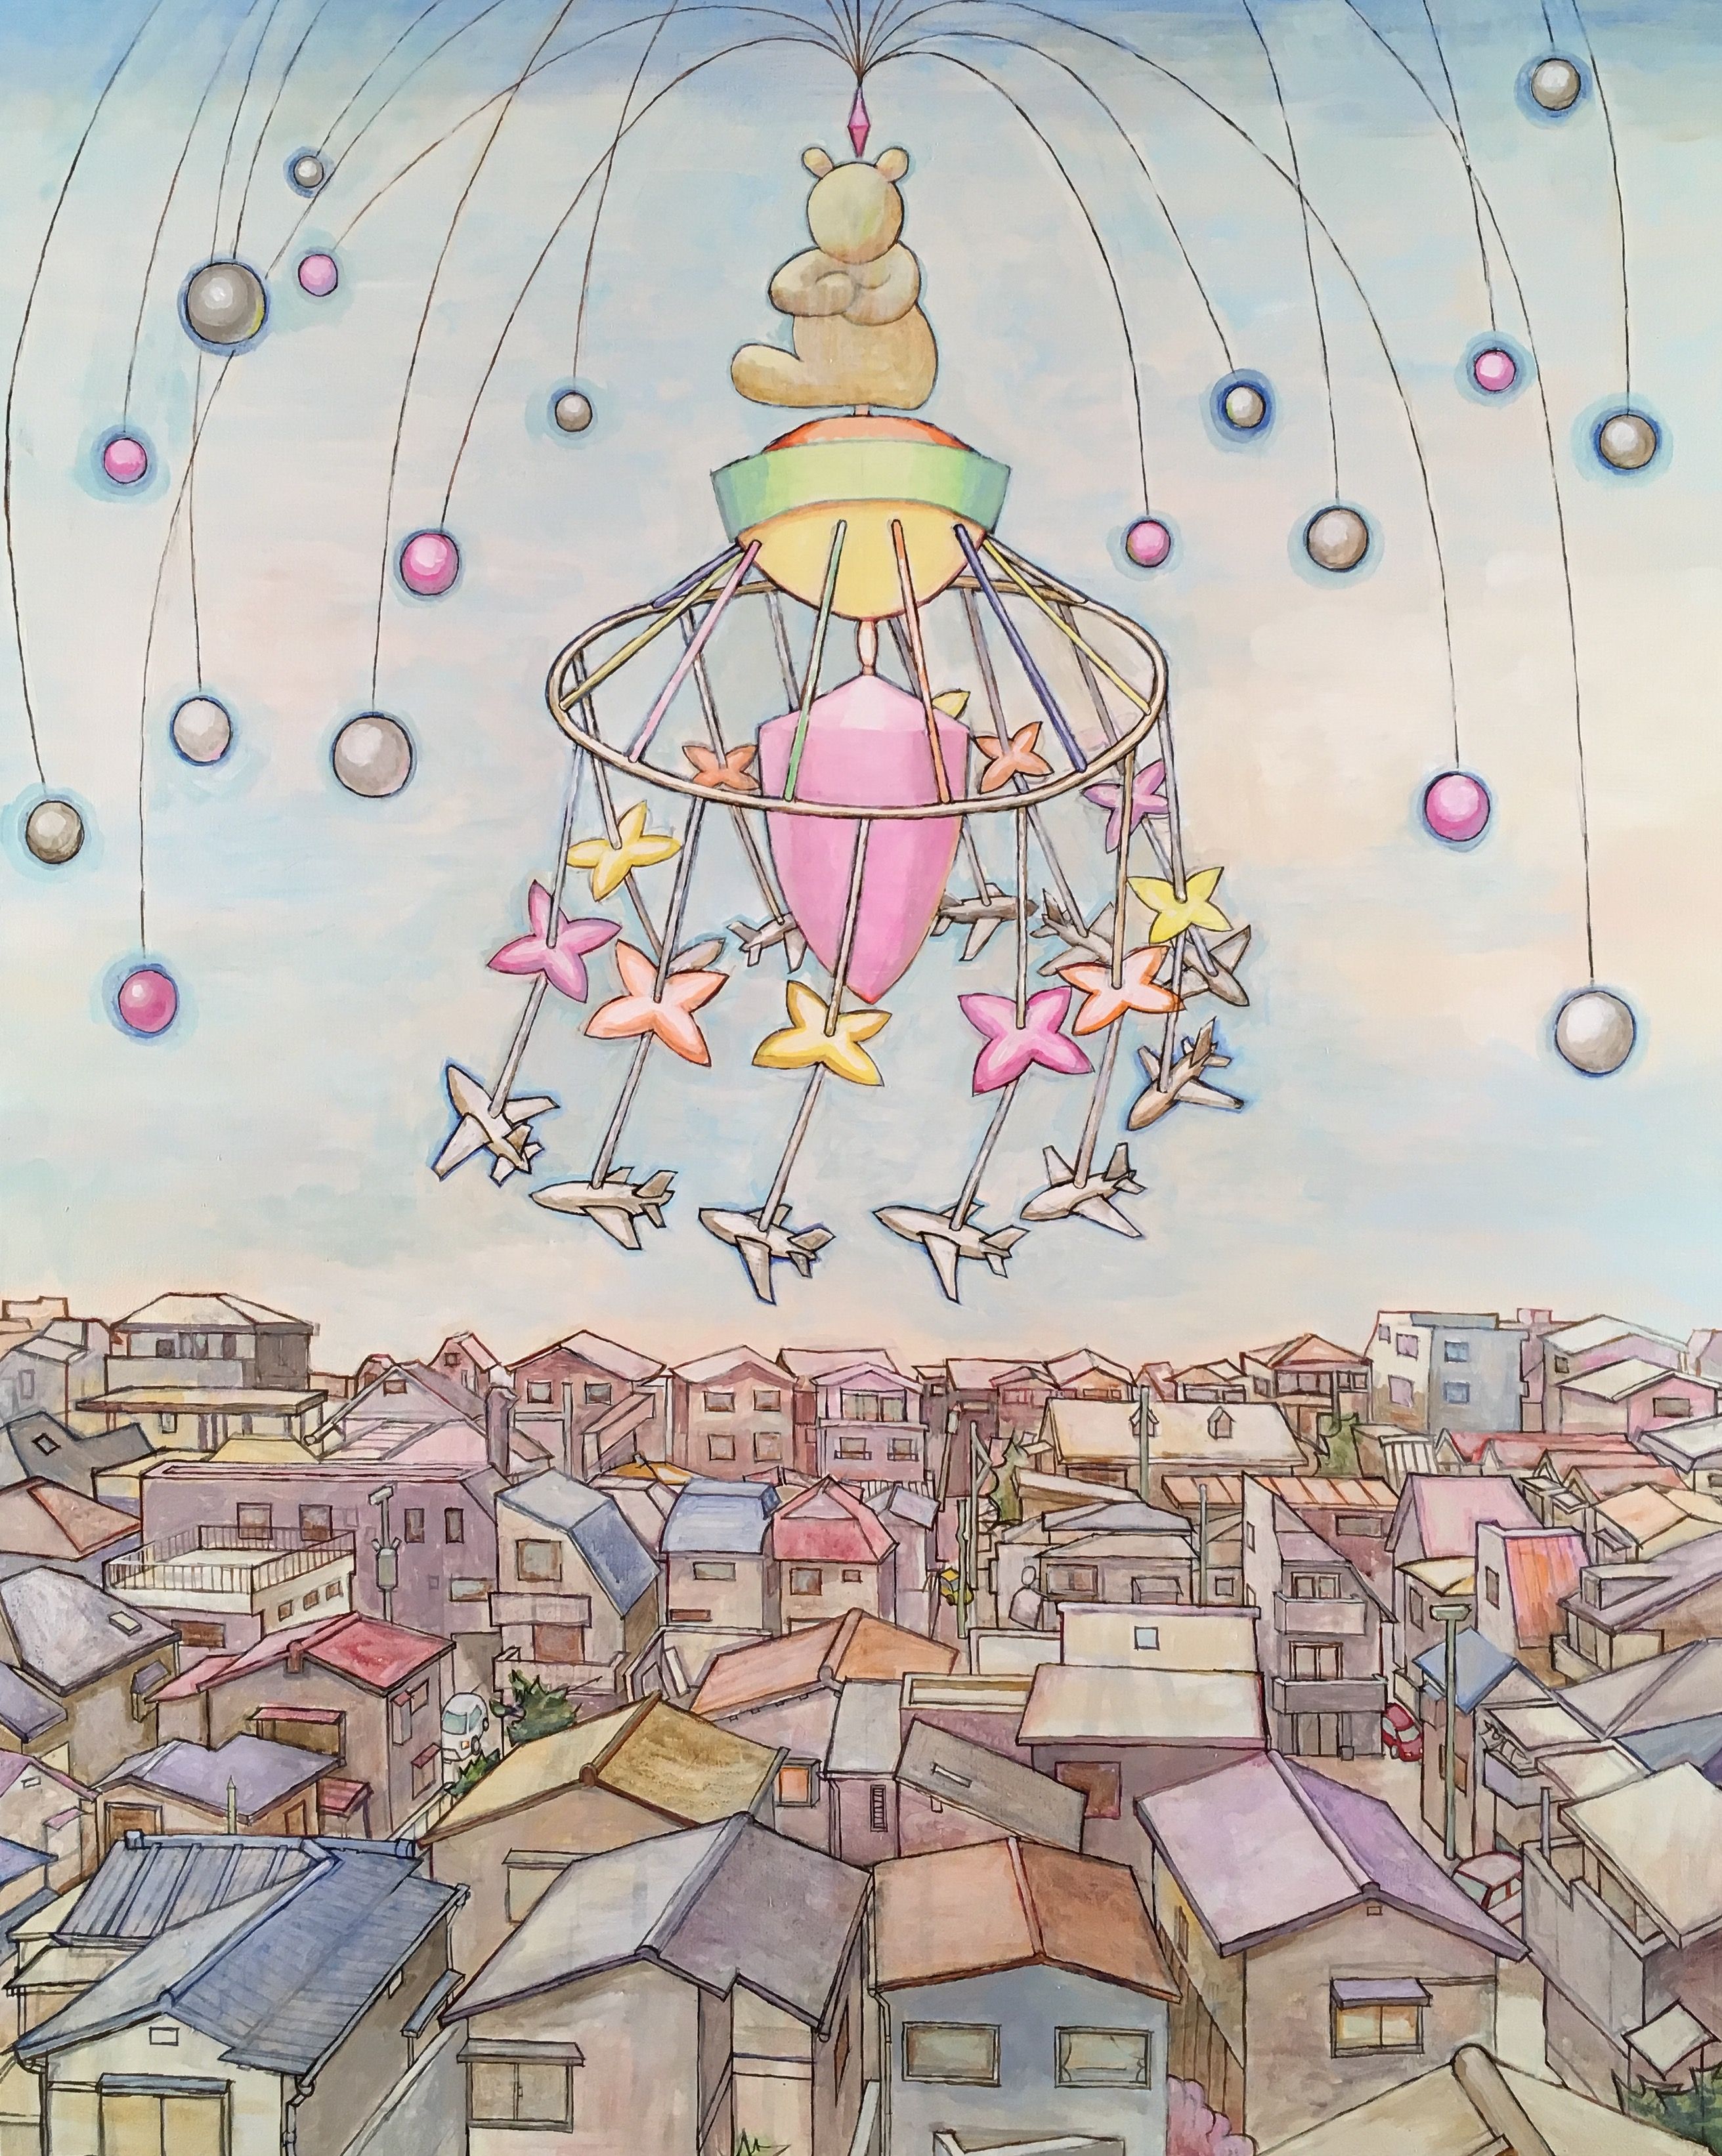 Hiro Sakaguchi’s Lullaby illustration featuring a baby mobile above a town.